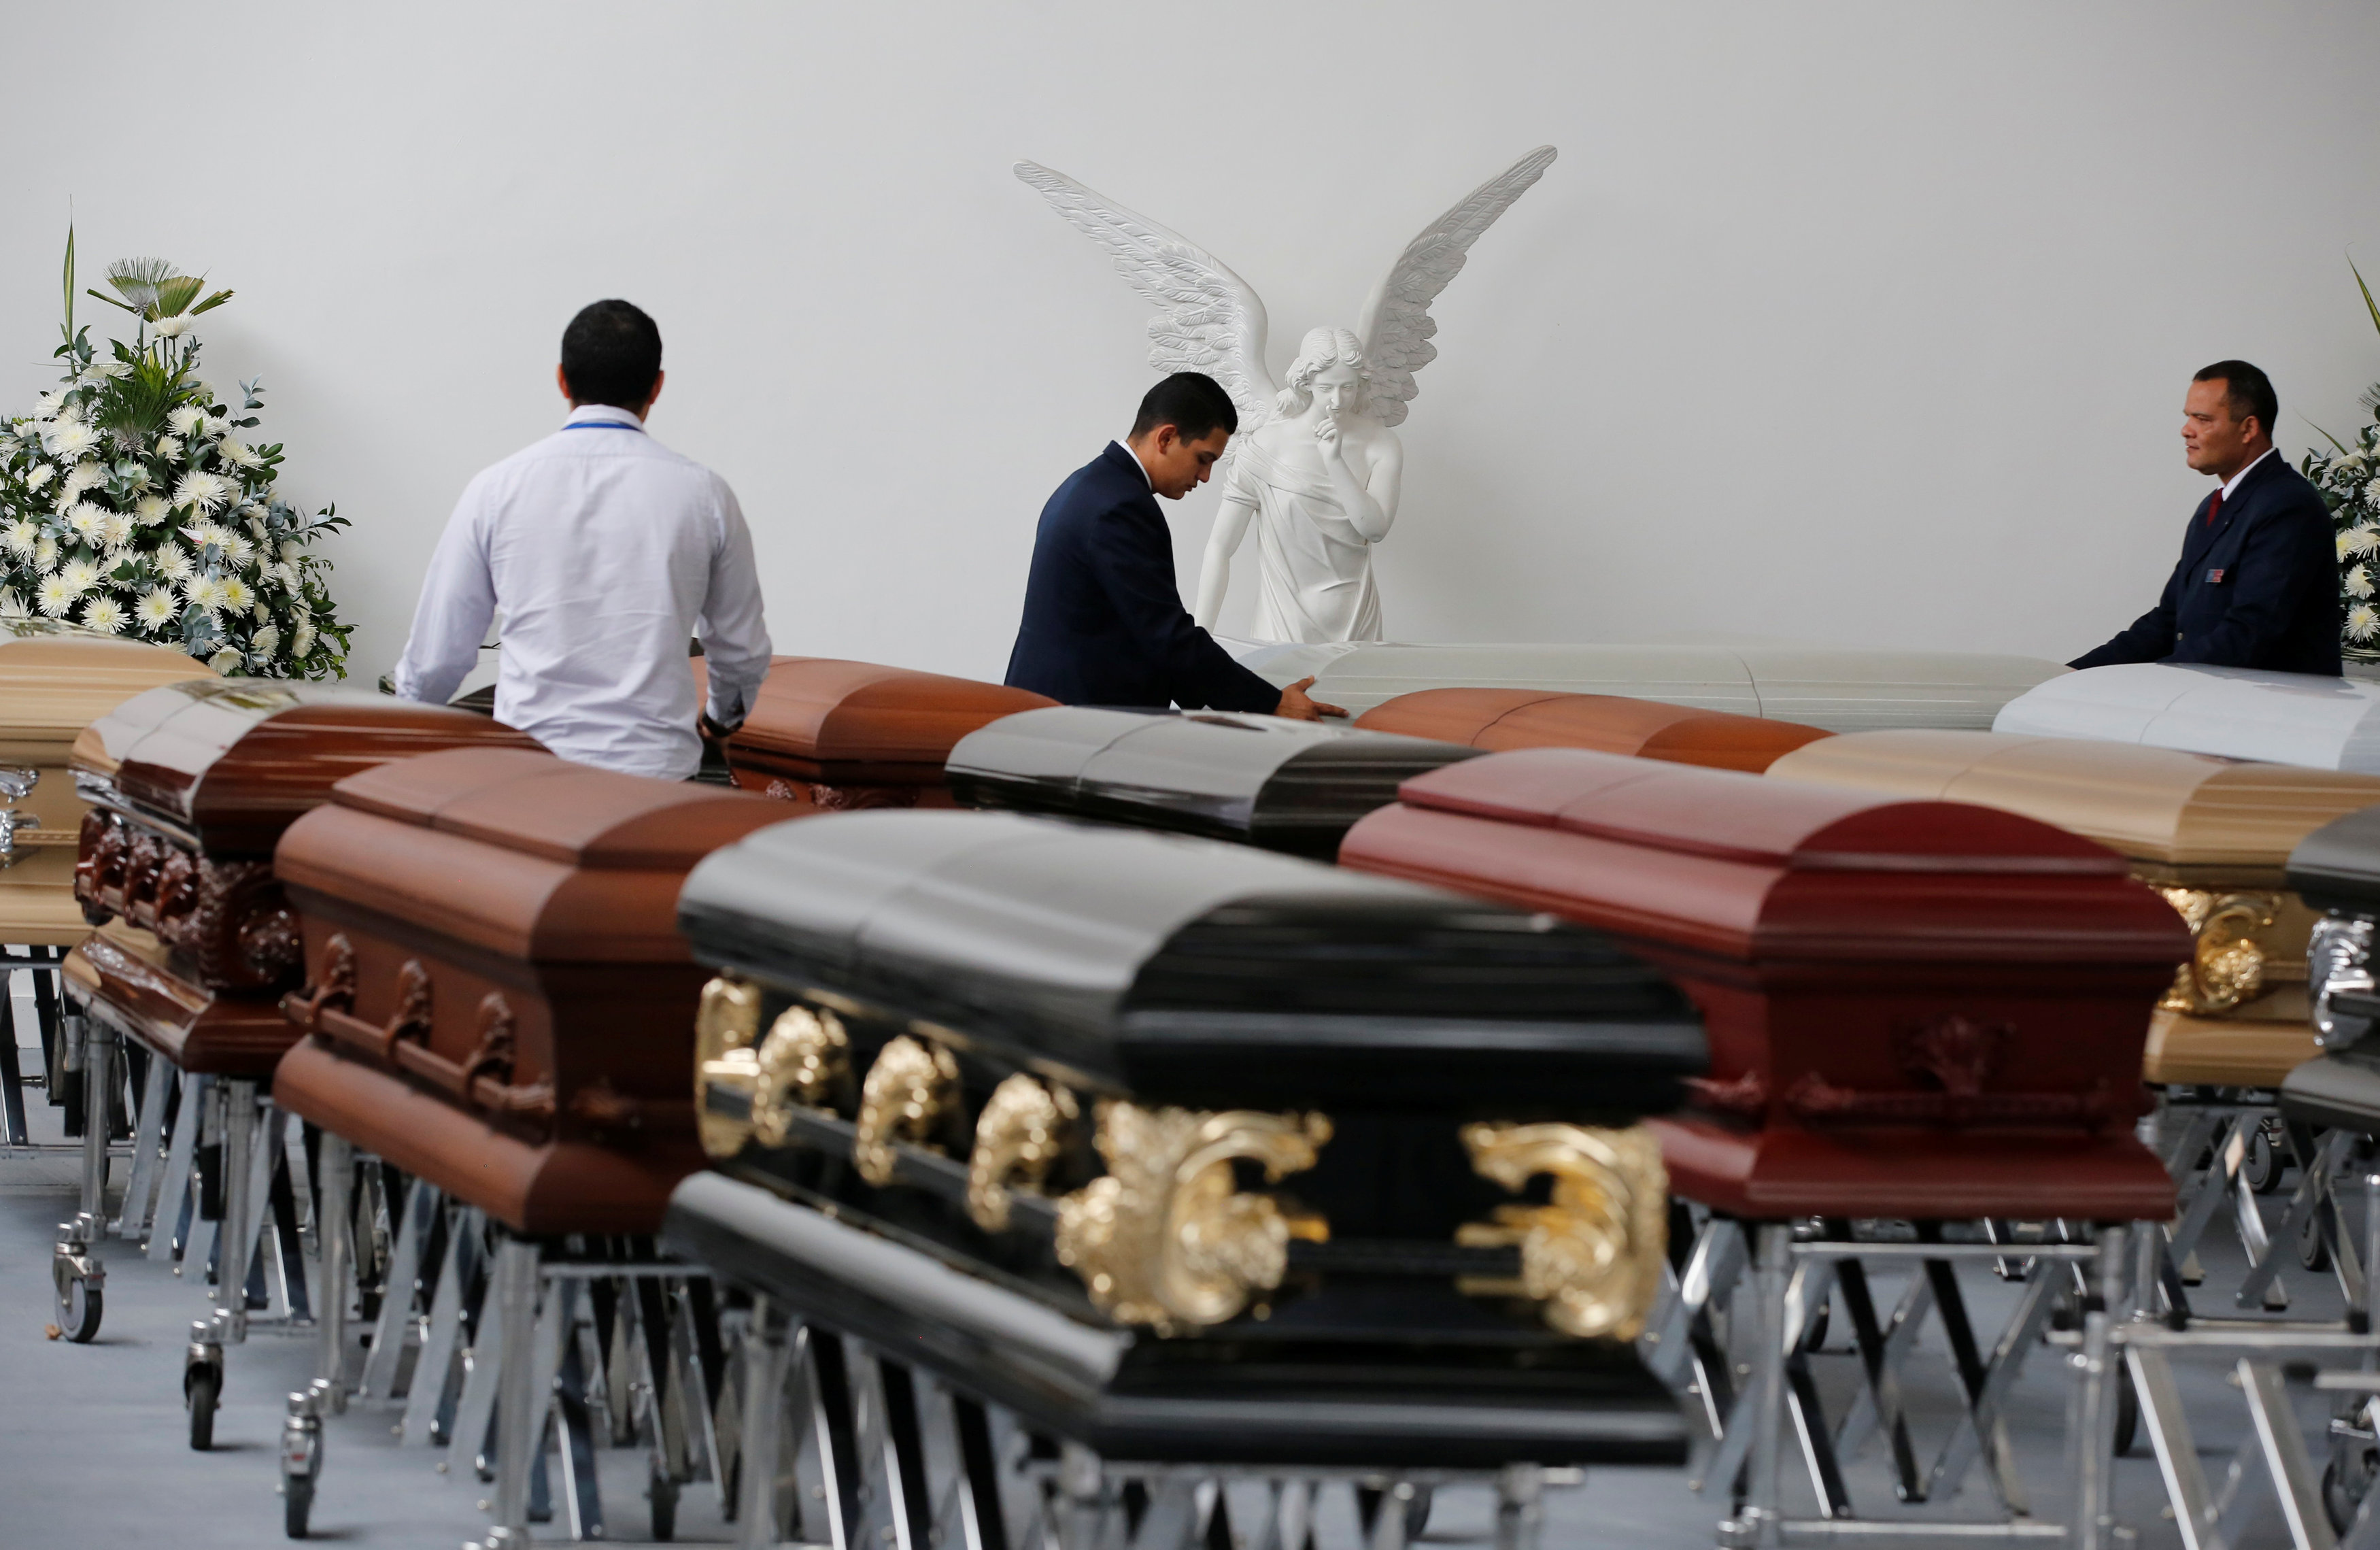 Funeral workers arrange coffins holding the remains of the victims who died in an accident of a plane that crashed into the Colombian jungle with Brazilian soccer team Chapecoense onboard, in Medellin, Colombia December 1, 2016. REUTERS/Jaime Saldarriaga TPX IMAGES OF THE DAY